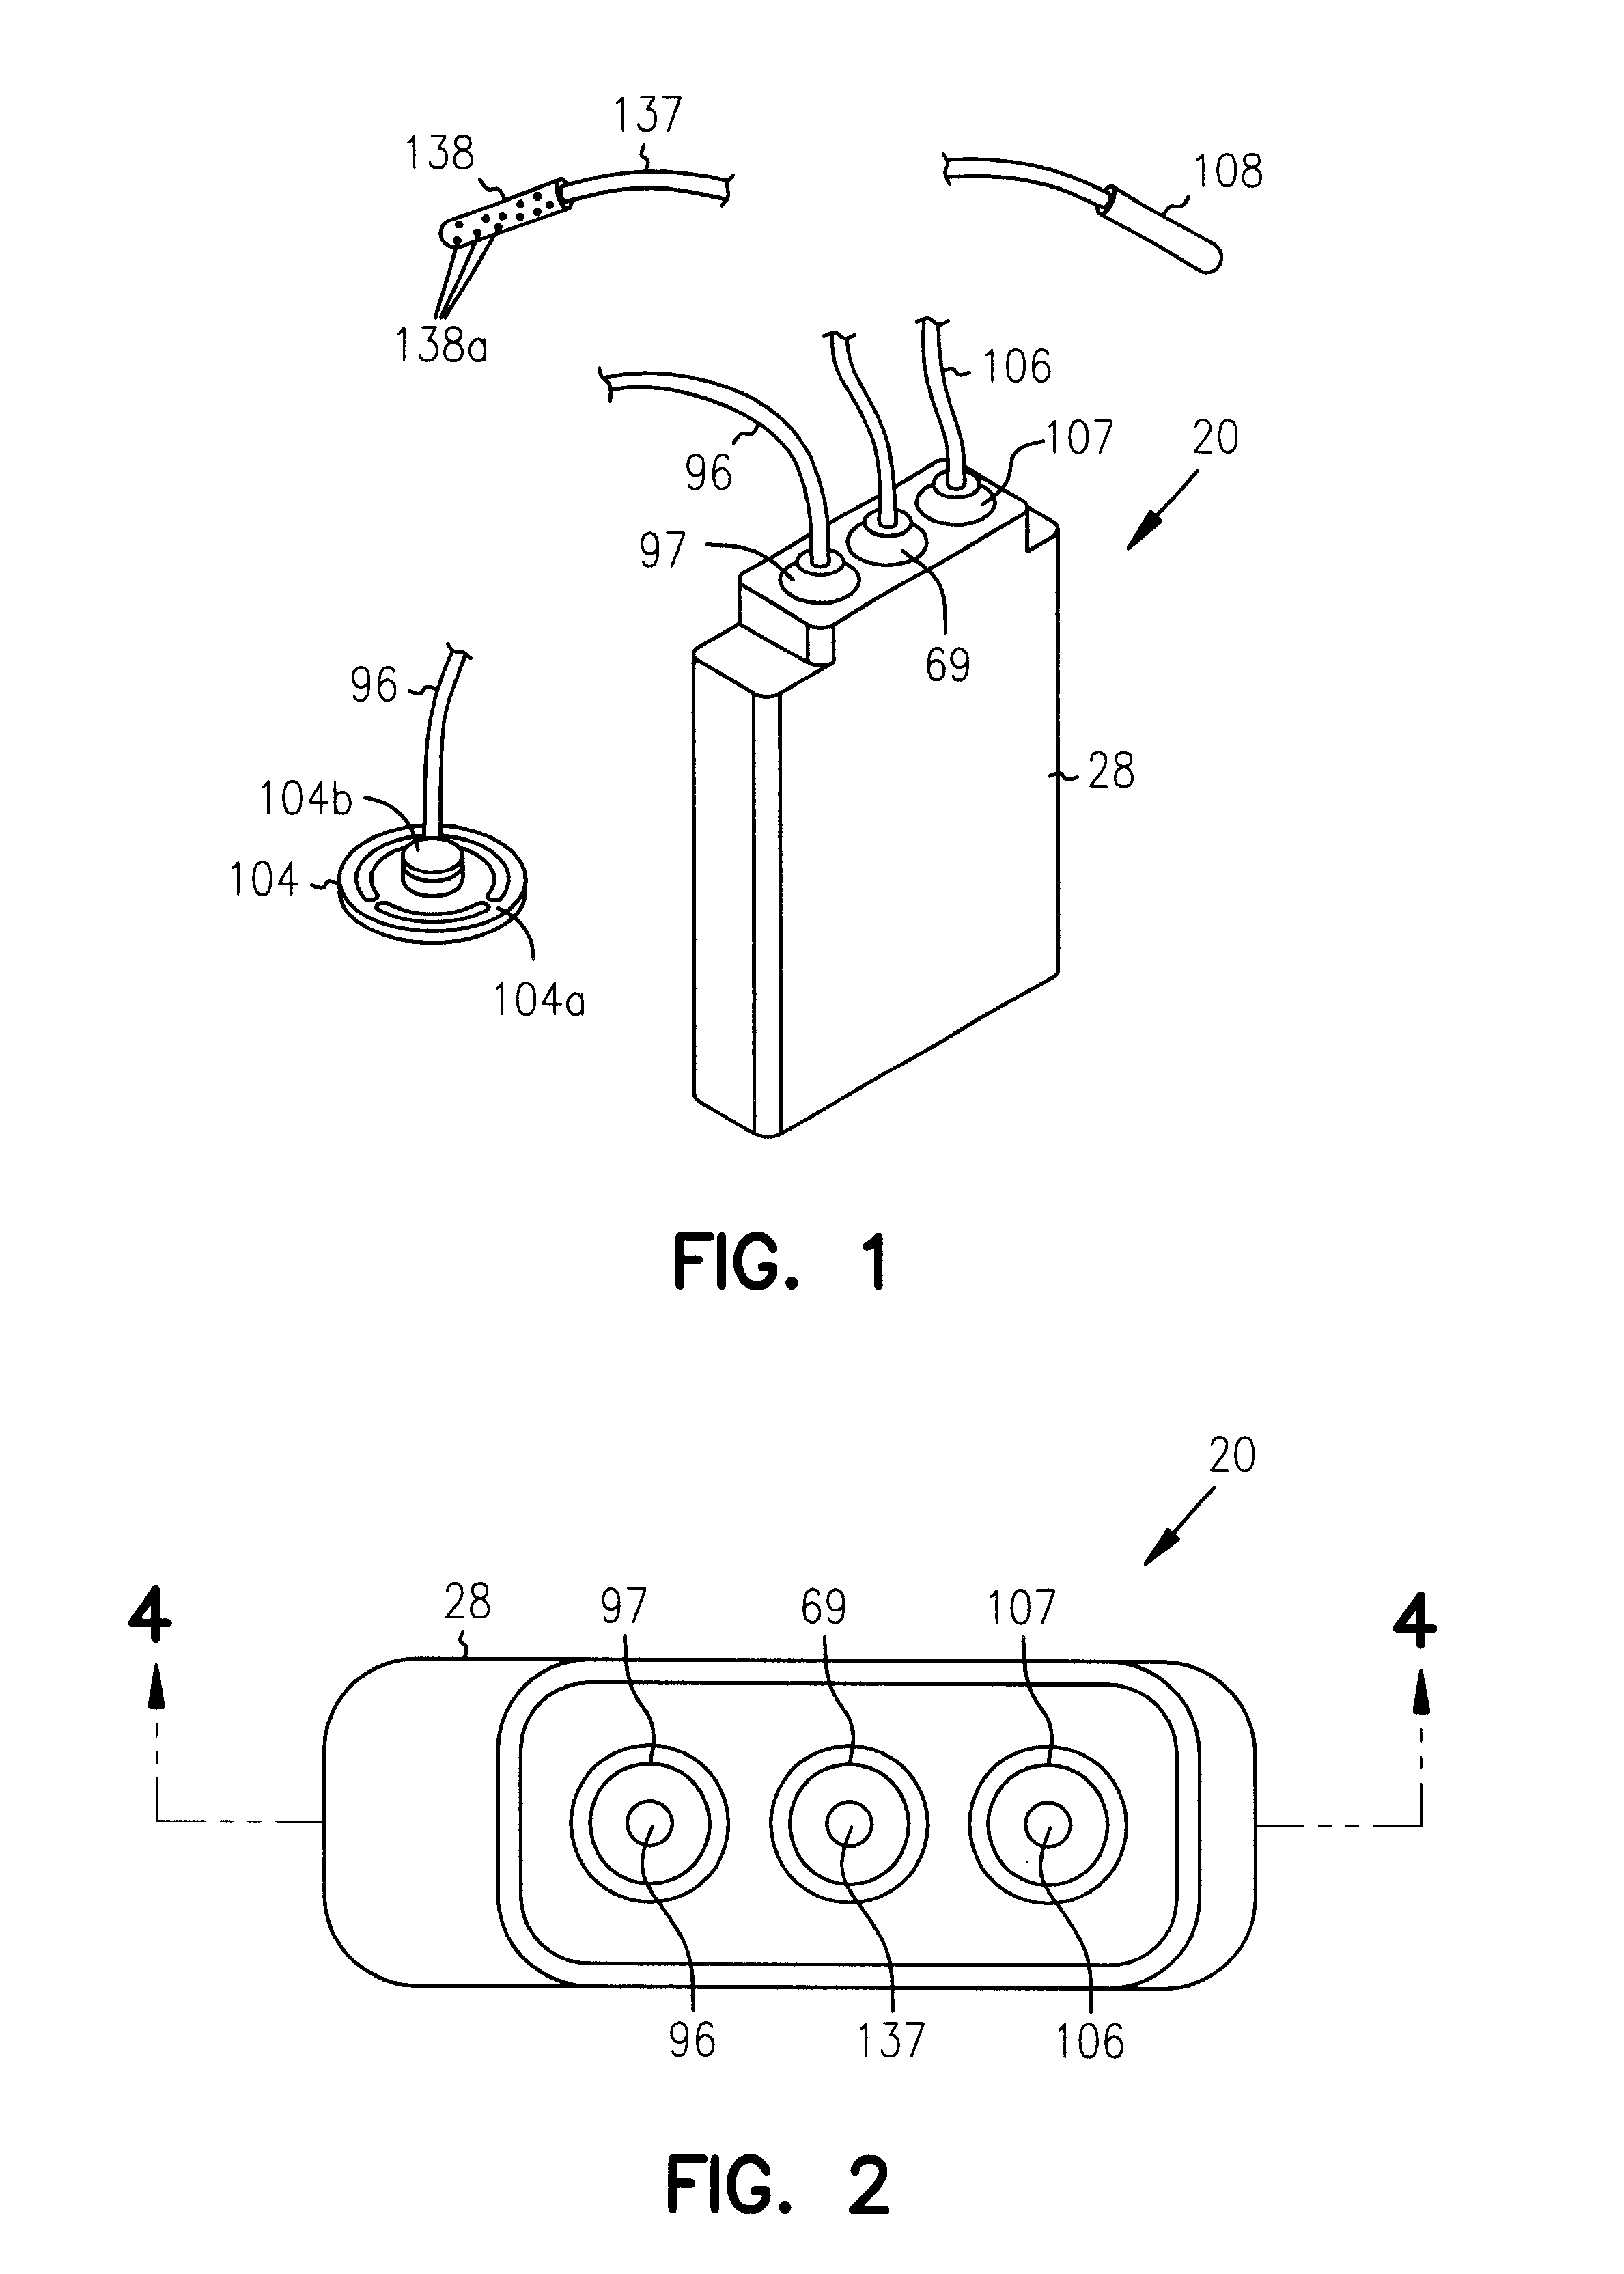 Implantable fluid delivery device for basal and bolus delivery of medicinal fluids